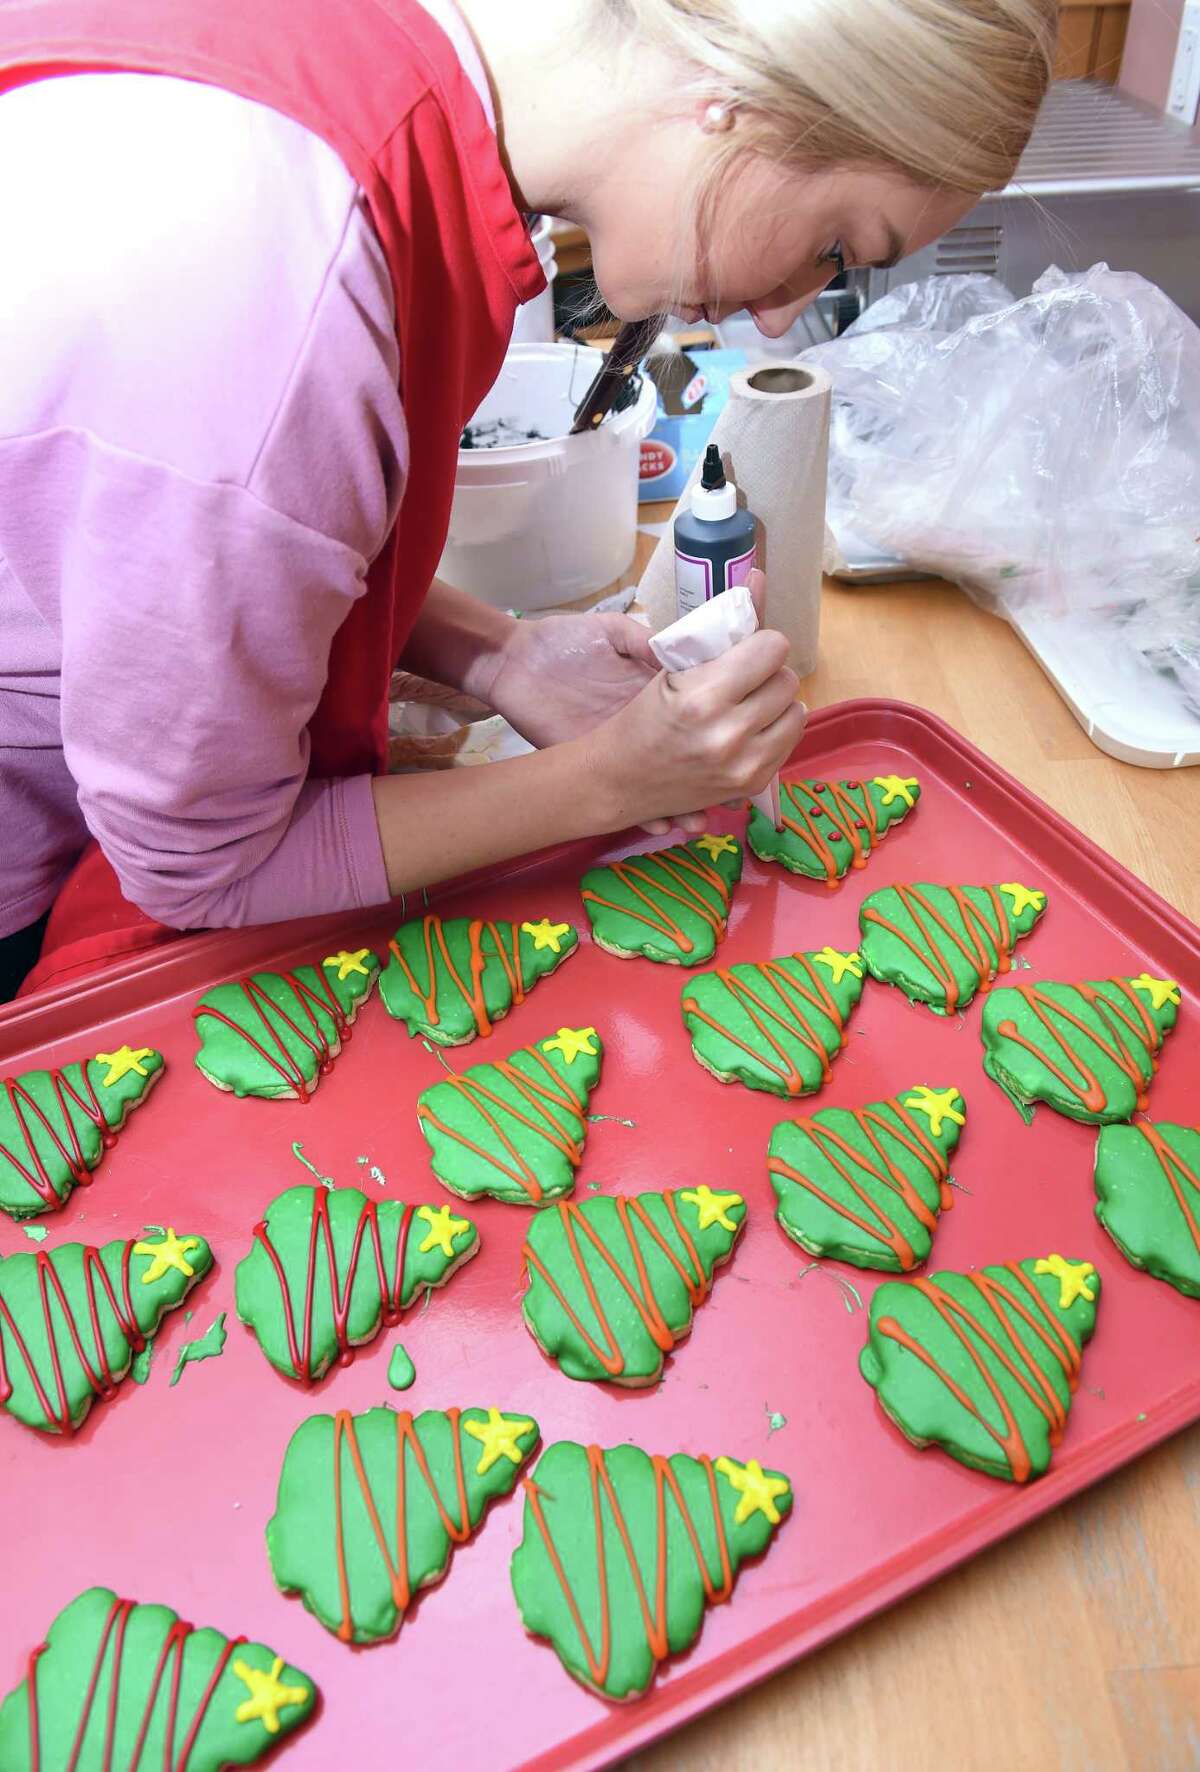 Briana Eagley decorates Christmas tree sugar cookies with icing at Julia's Bakery in Orange on December 20, 2018. The store sells around 100 dozen of the decorated sugar cookies during the holiday season.